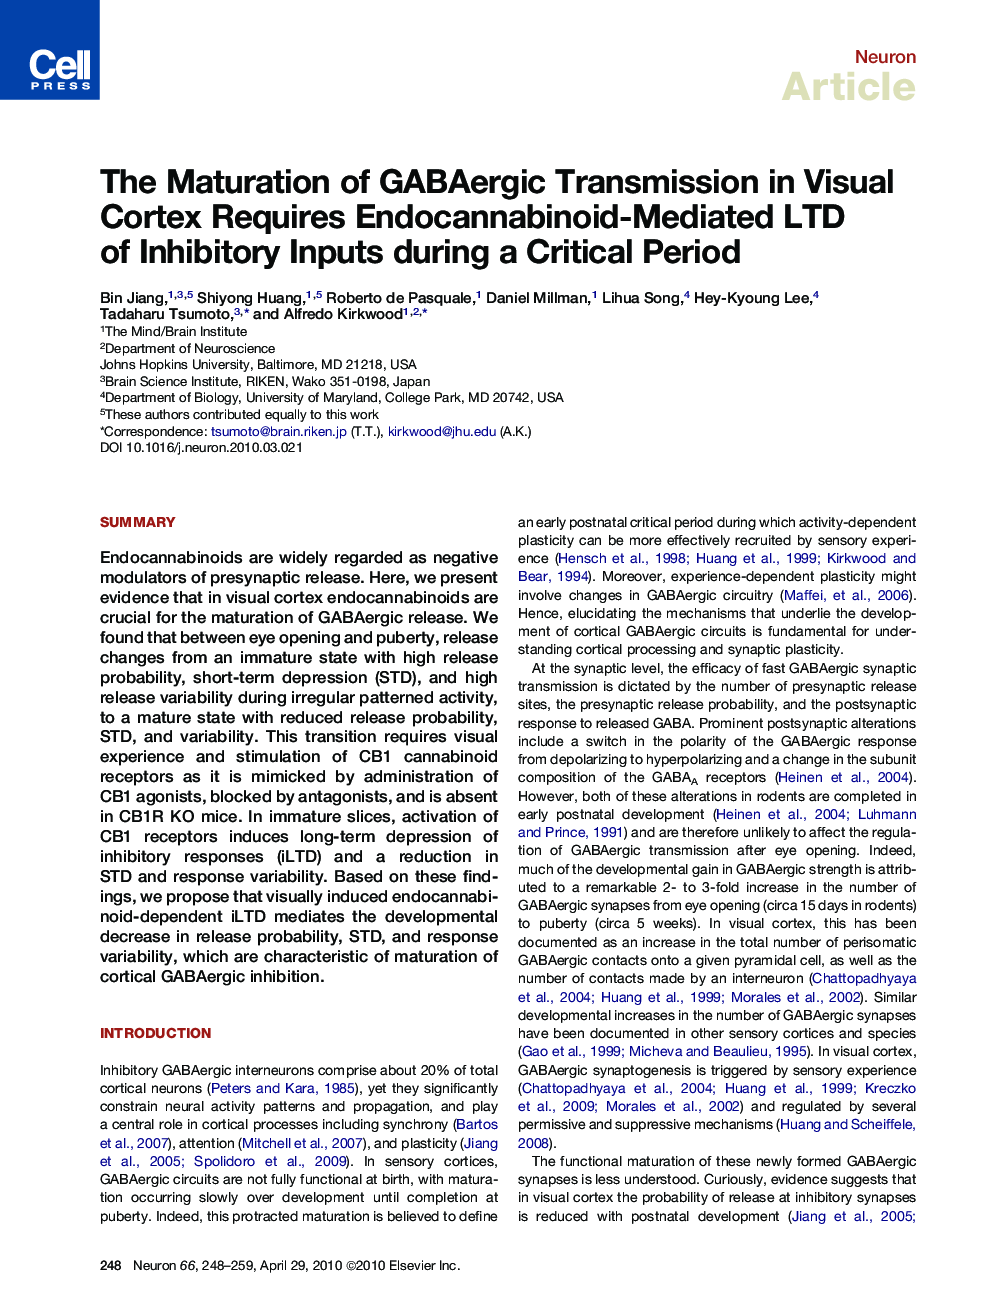 The Maturation of GABAergic Transmission in Visual Cortex Requires Endocannabinoid-Mediated LTD of Inhibitory Inputs during a Critical Period